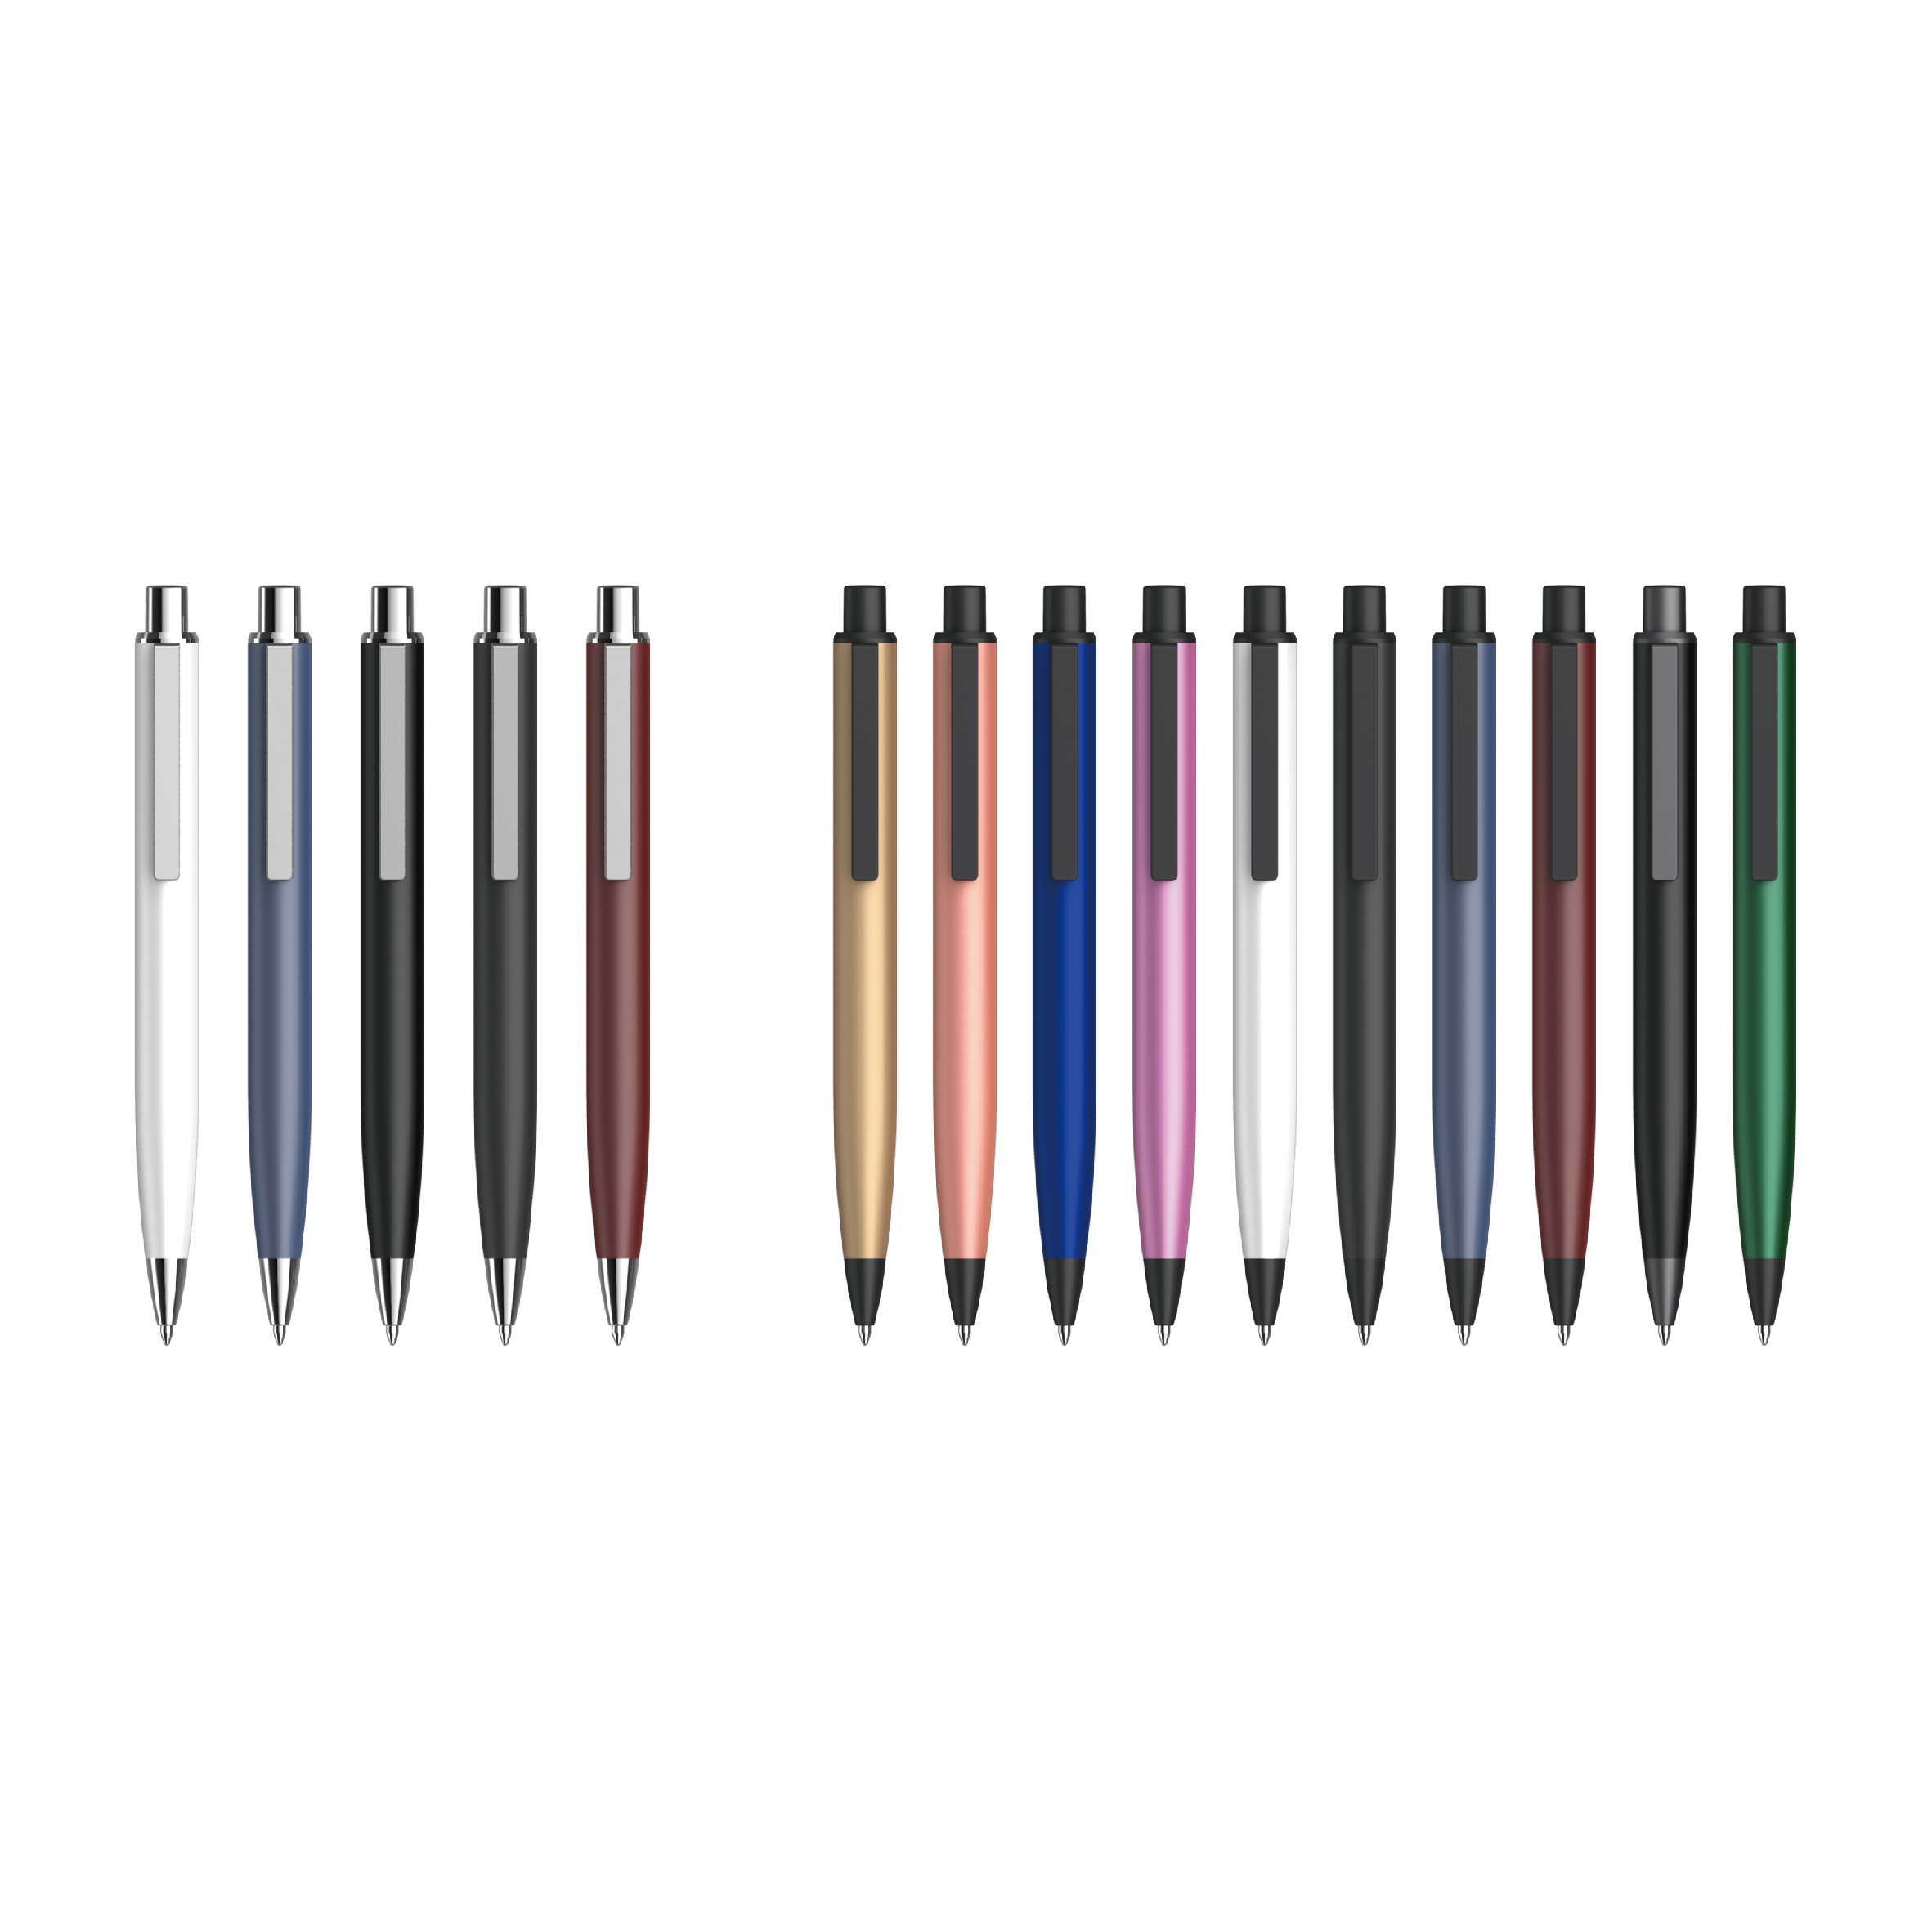 Oval-Shaped Metal Retractable Ball Pen Perfect gift,0.7mm/1.0mm